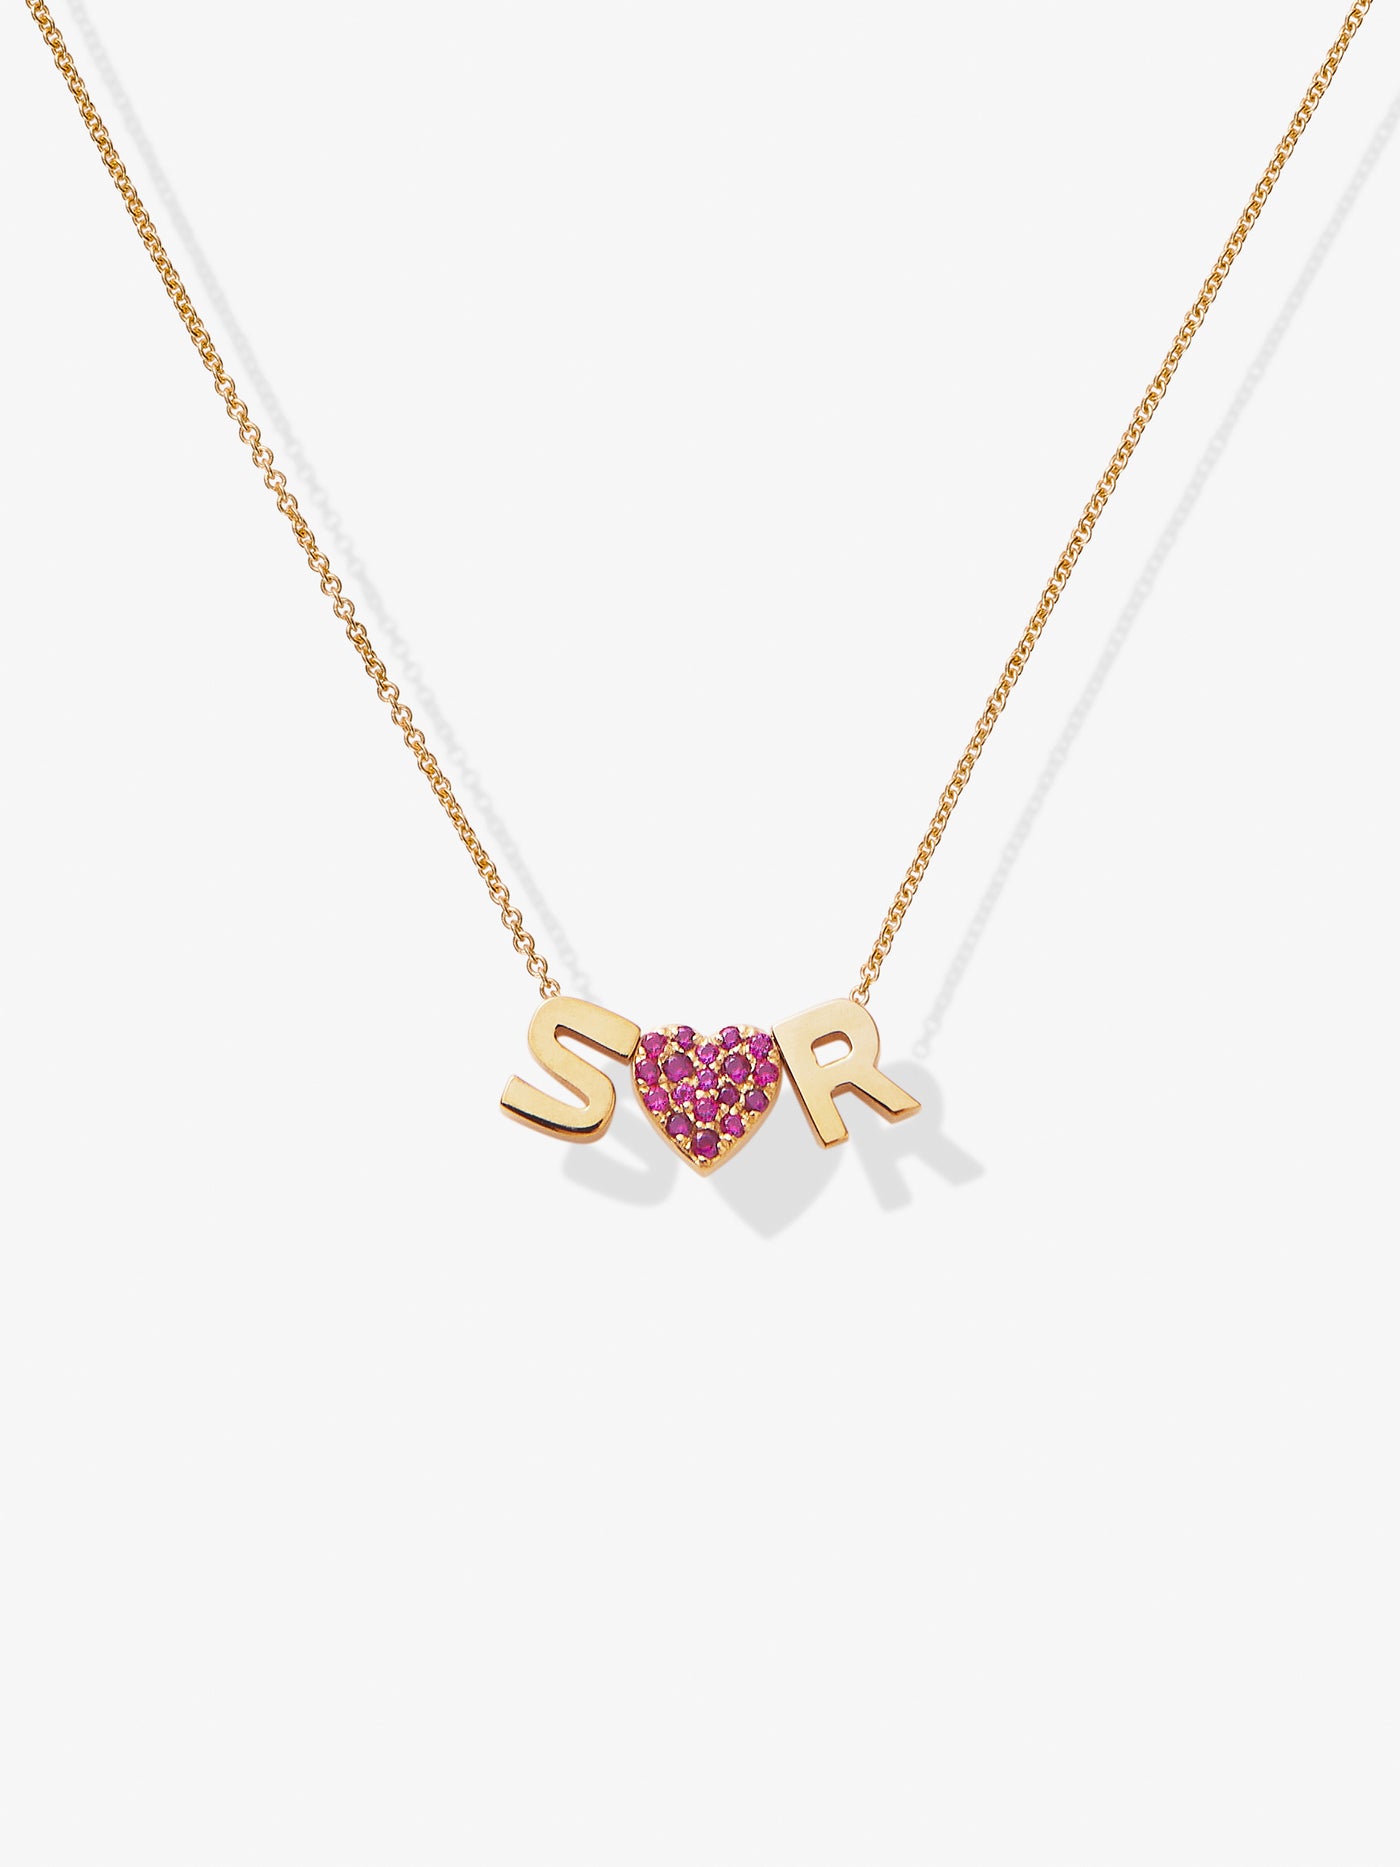 Two Letters and Ruby Heart Necklace in 18k Gold